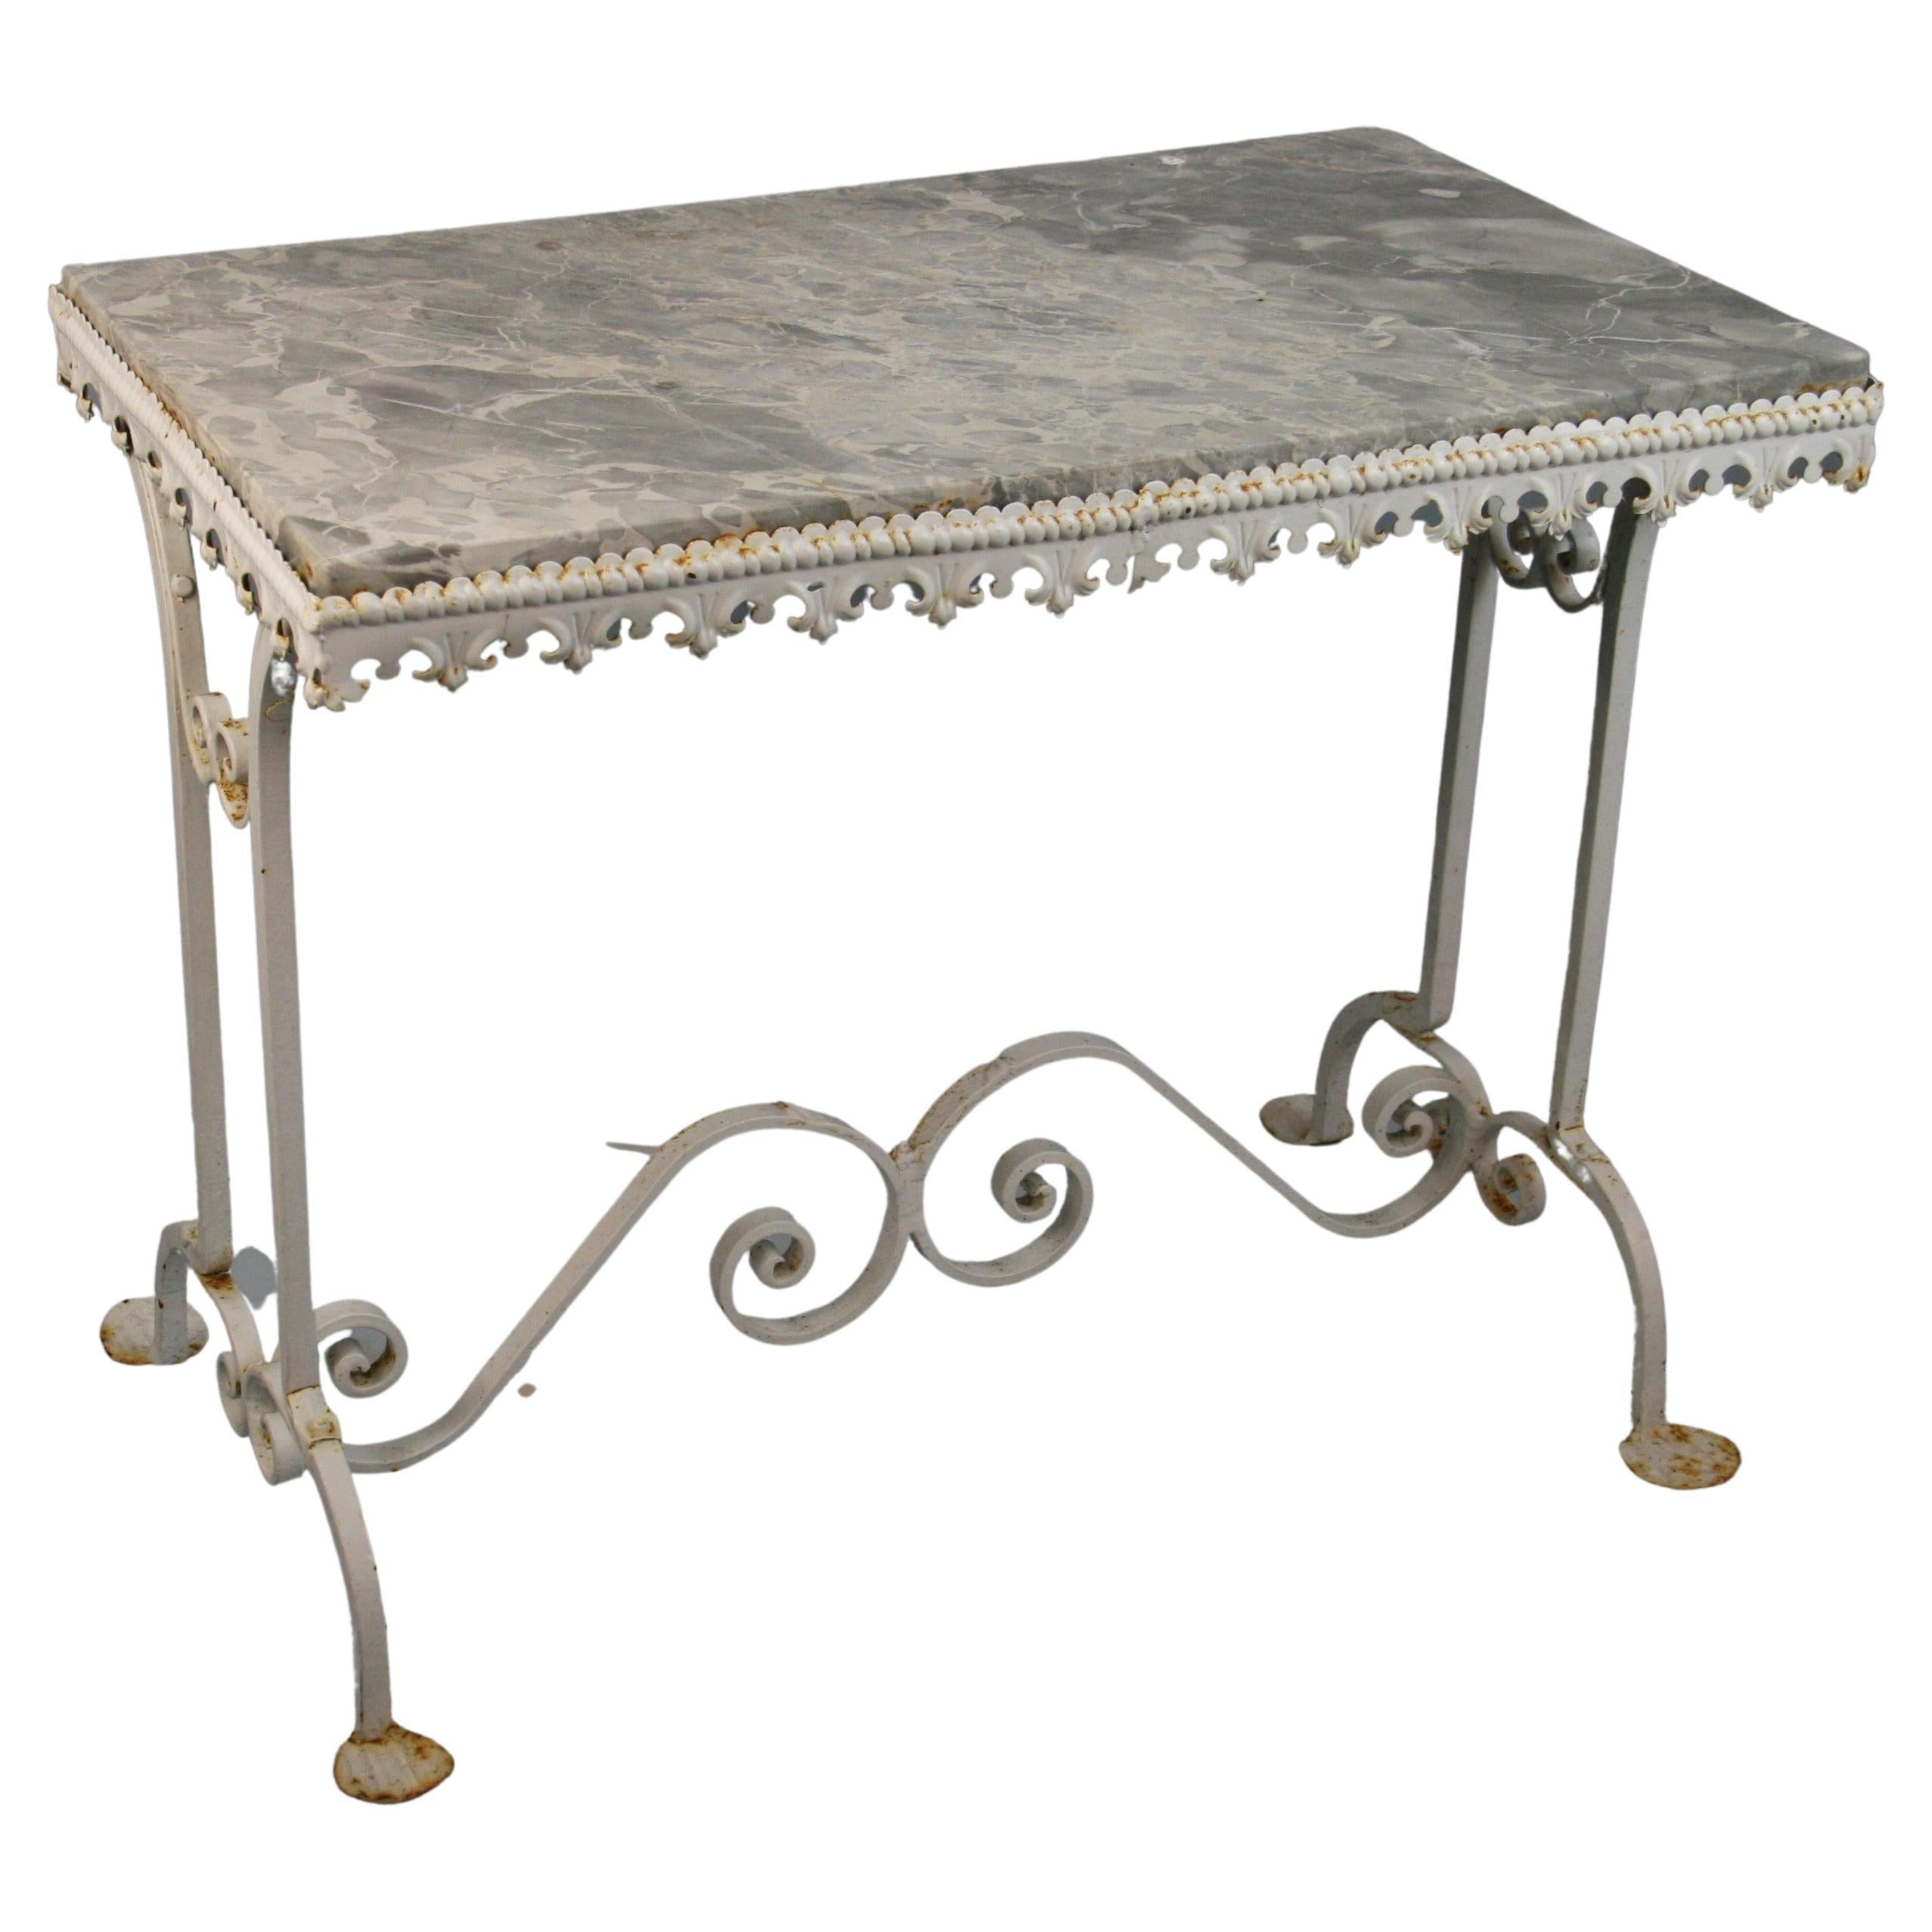  Marble and Iron Garden Table For Sale